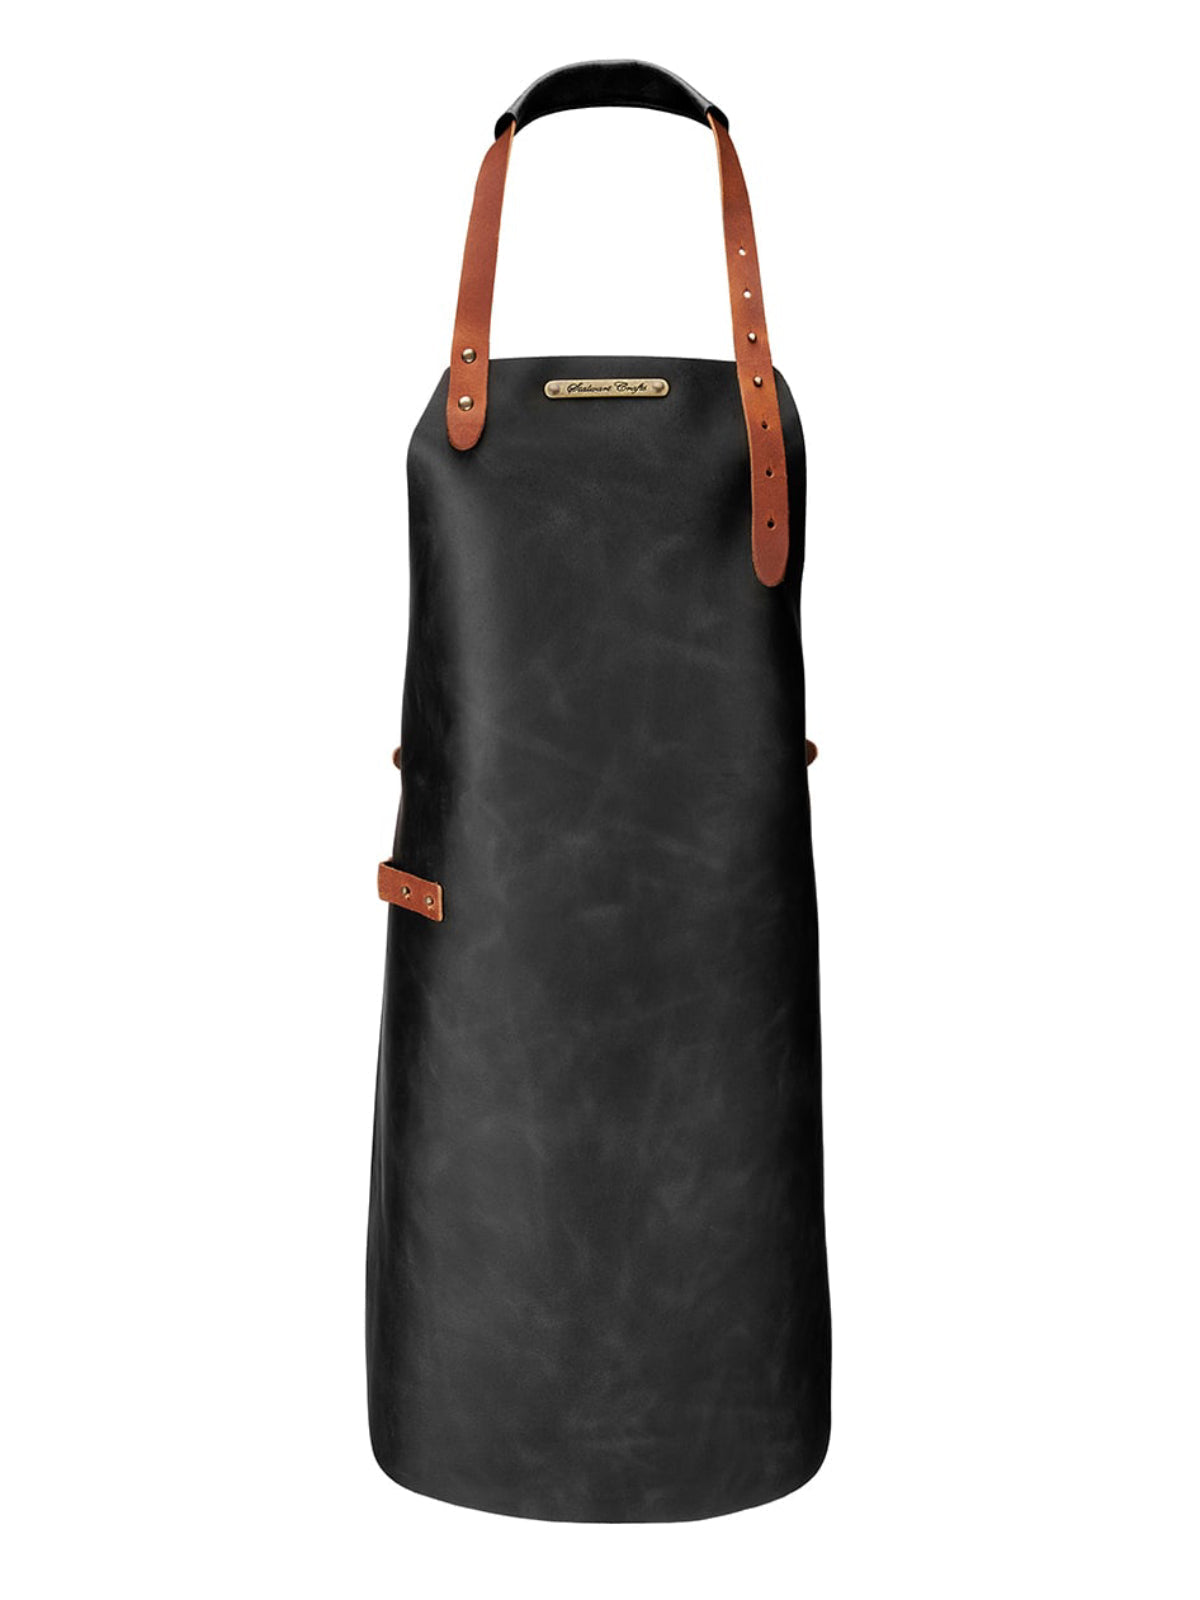 Leather Apron Basic Black by STW -  ChefsCotton